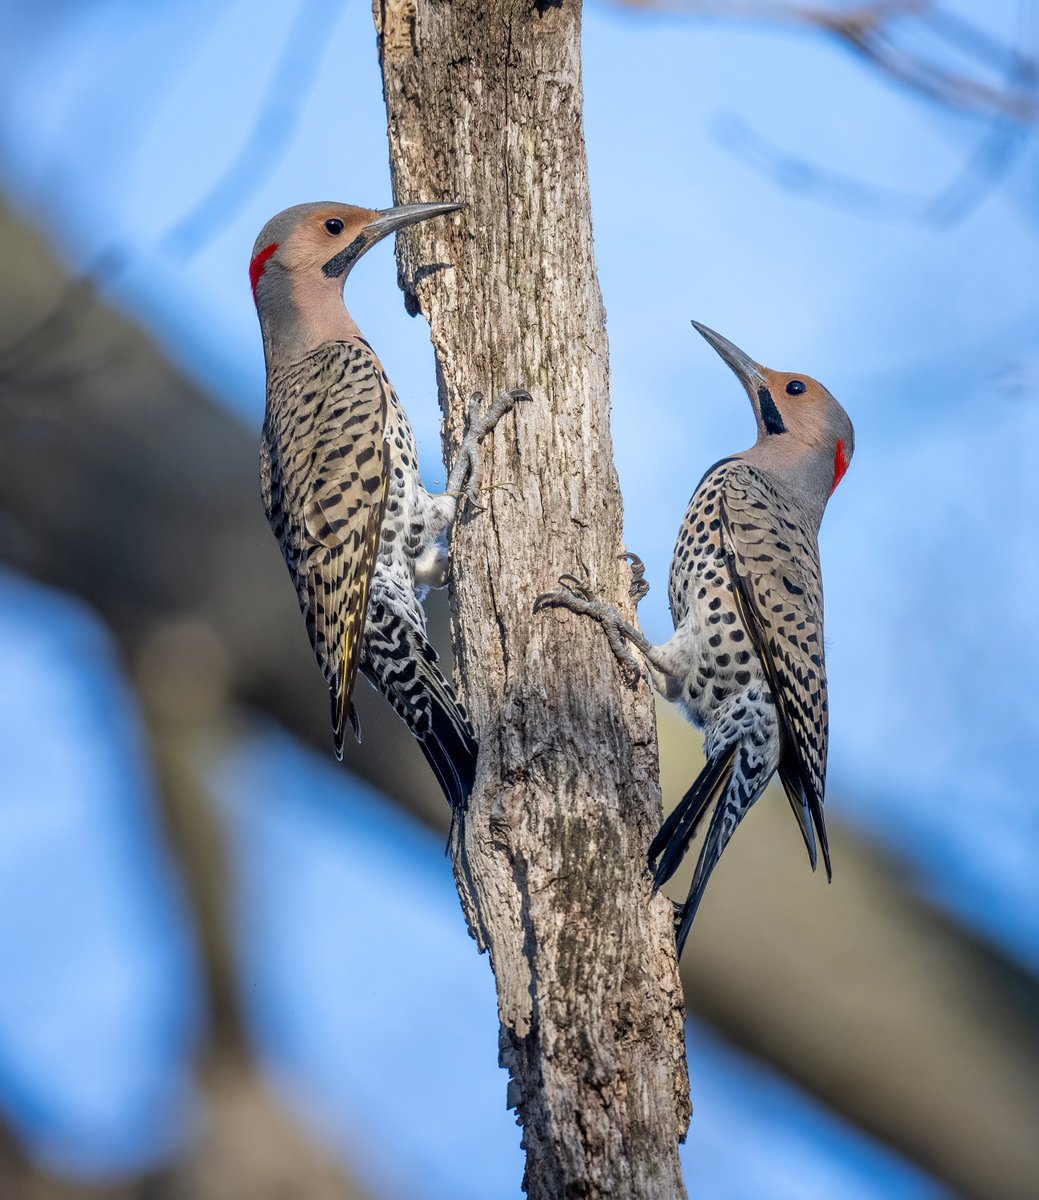 Two male Northern Flickers (the males have mustaches) discussing territory. They were chattering and chasing each other around.